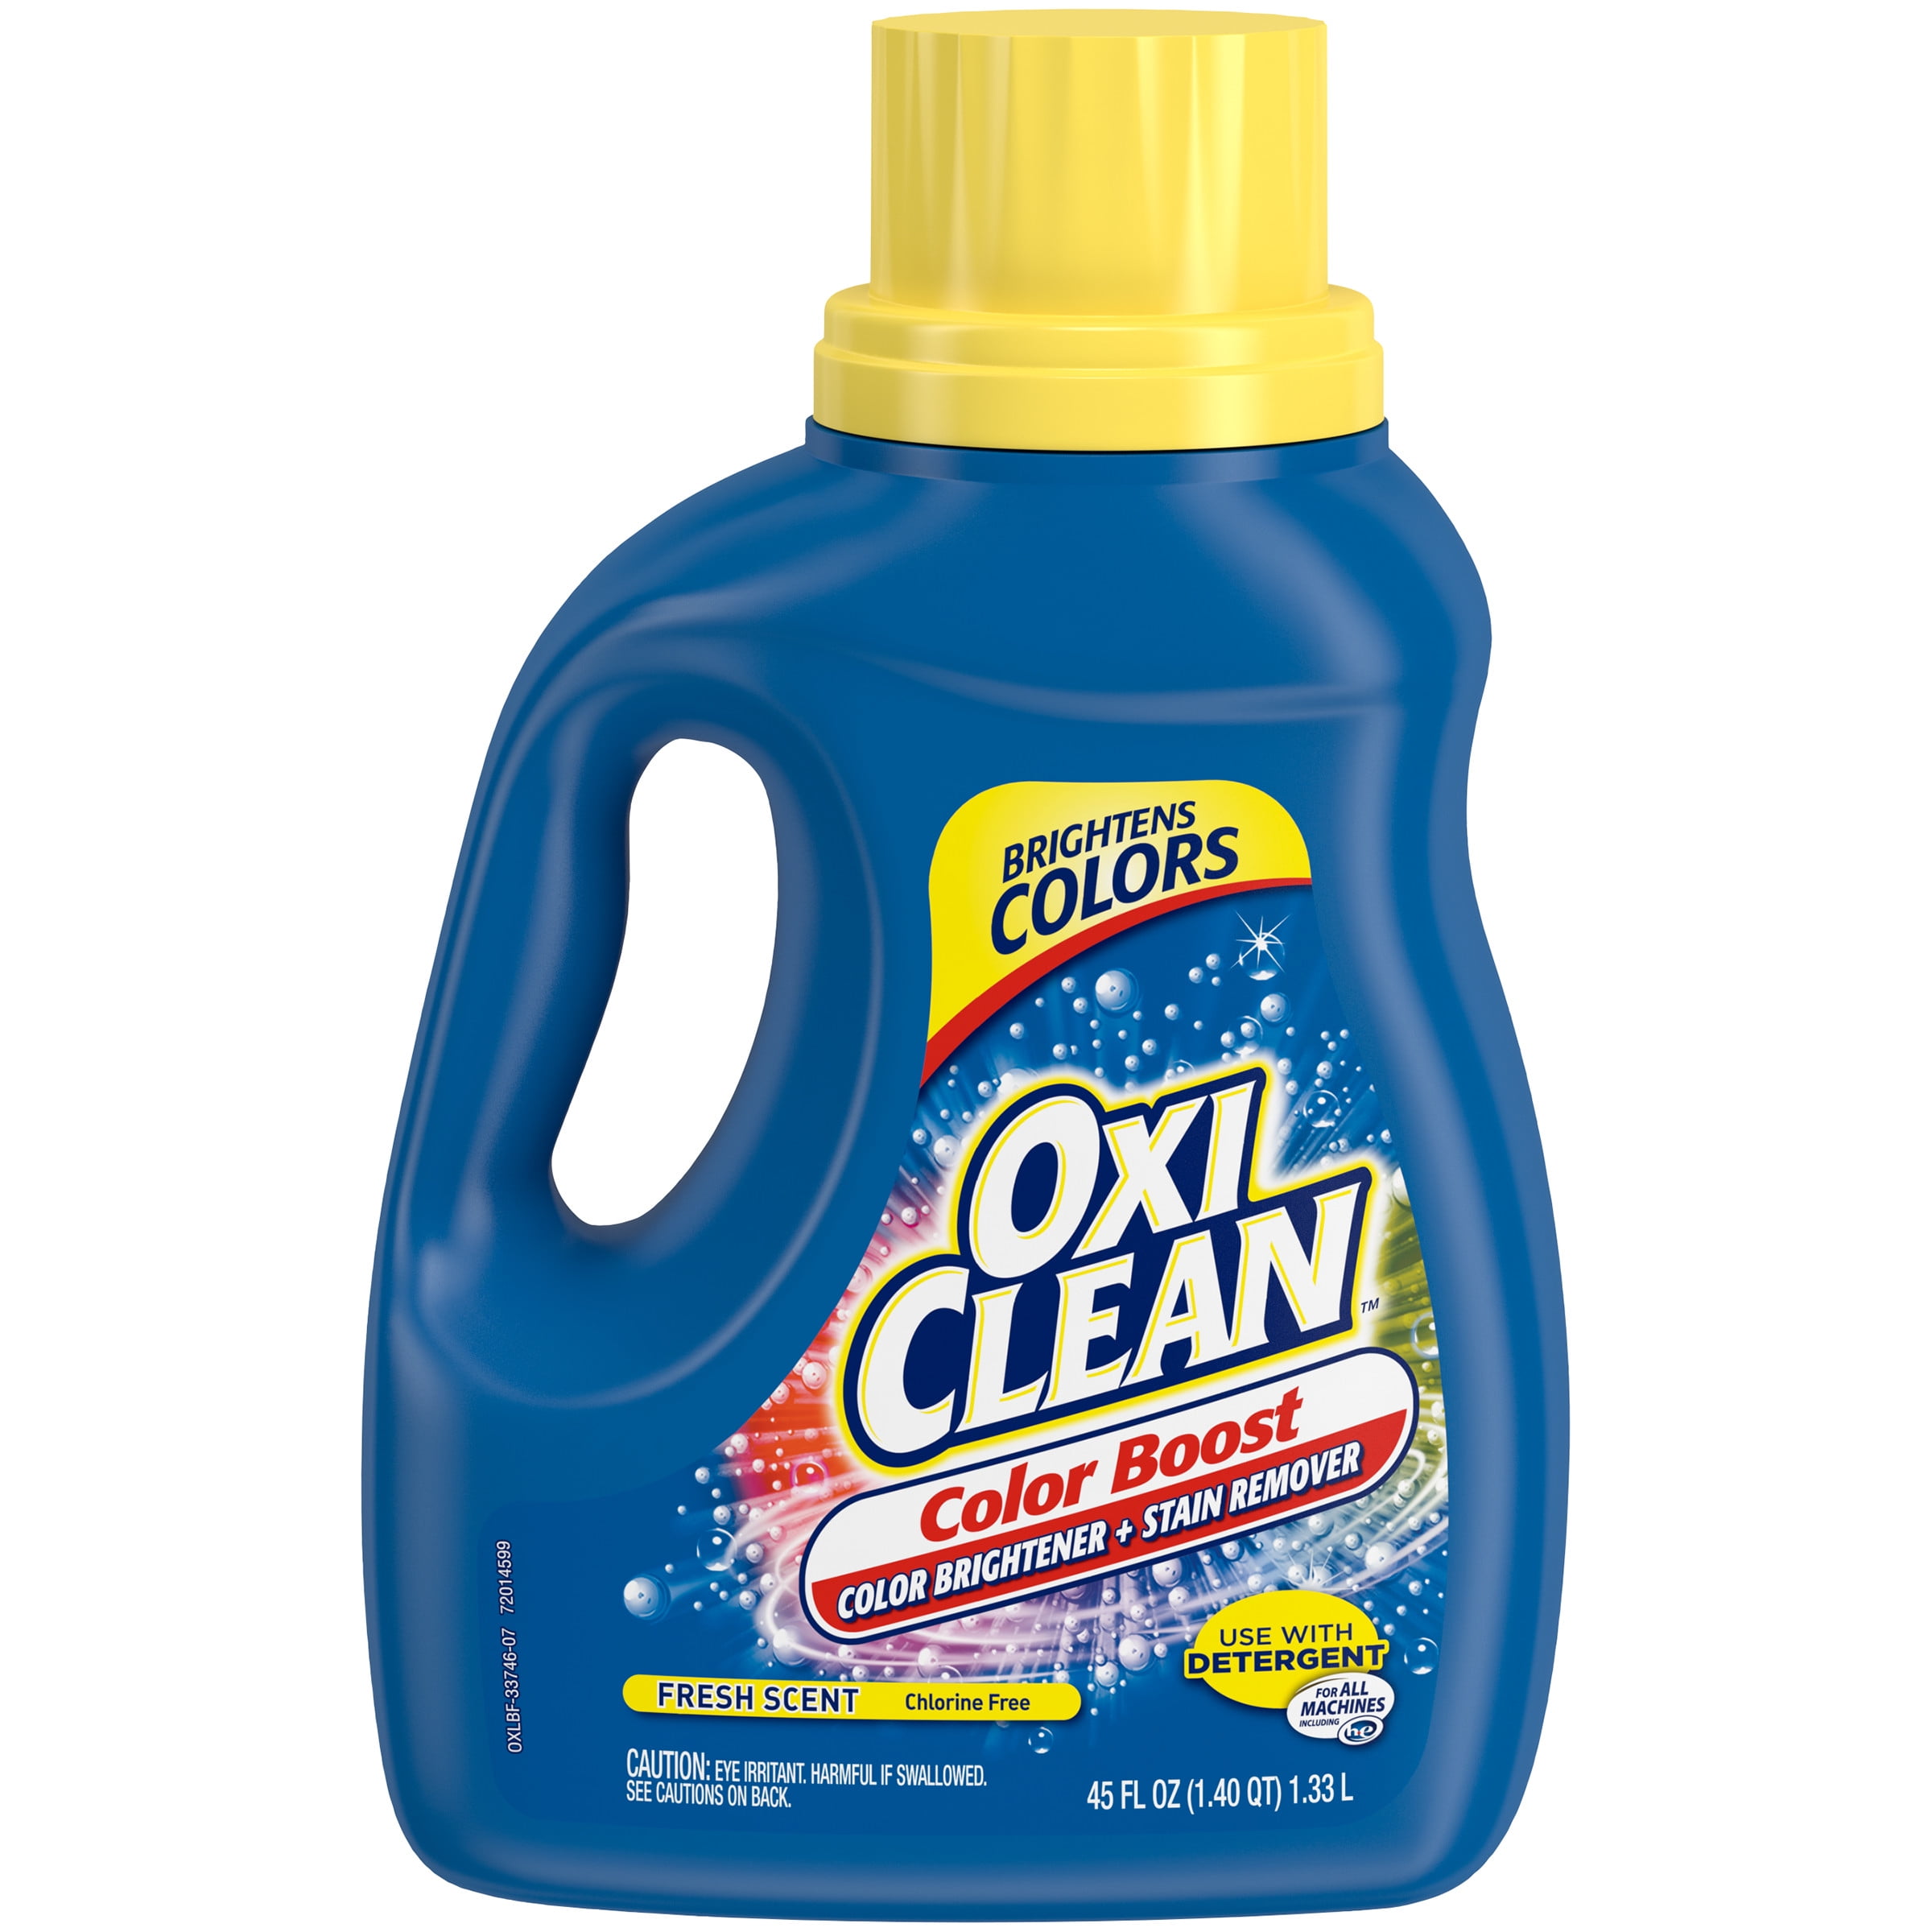 OxiClean Color Boost Laundry Color Brightener & Stain Remover Power Paks -  Shop Stain Removers at H-E-B